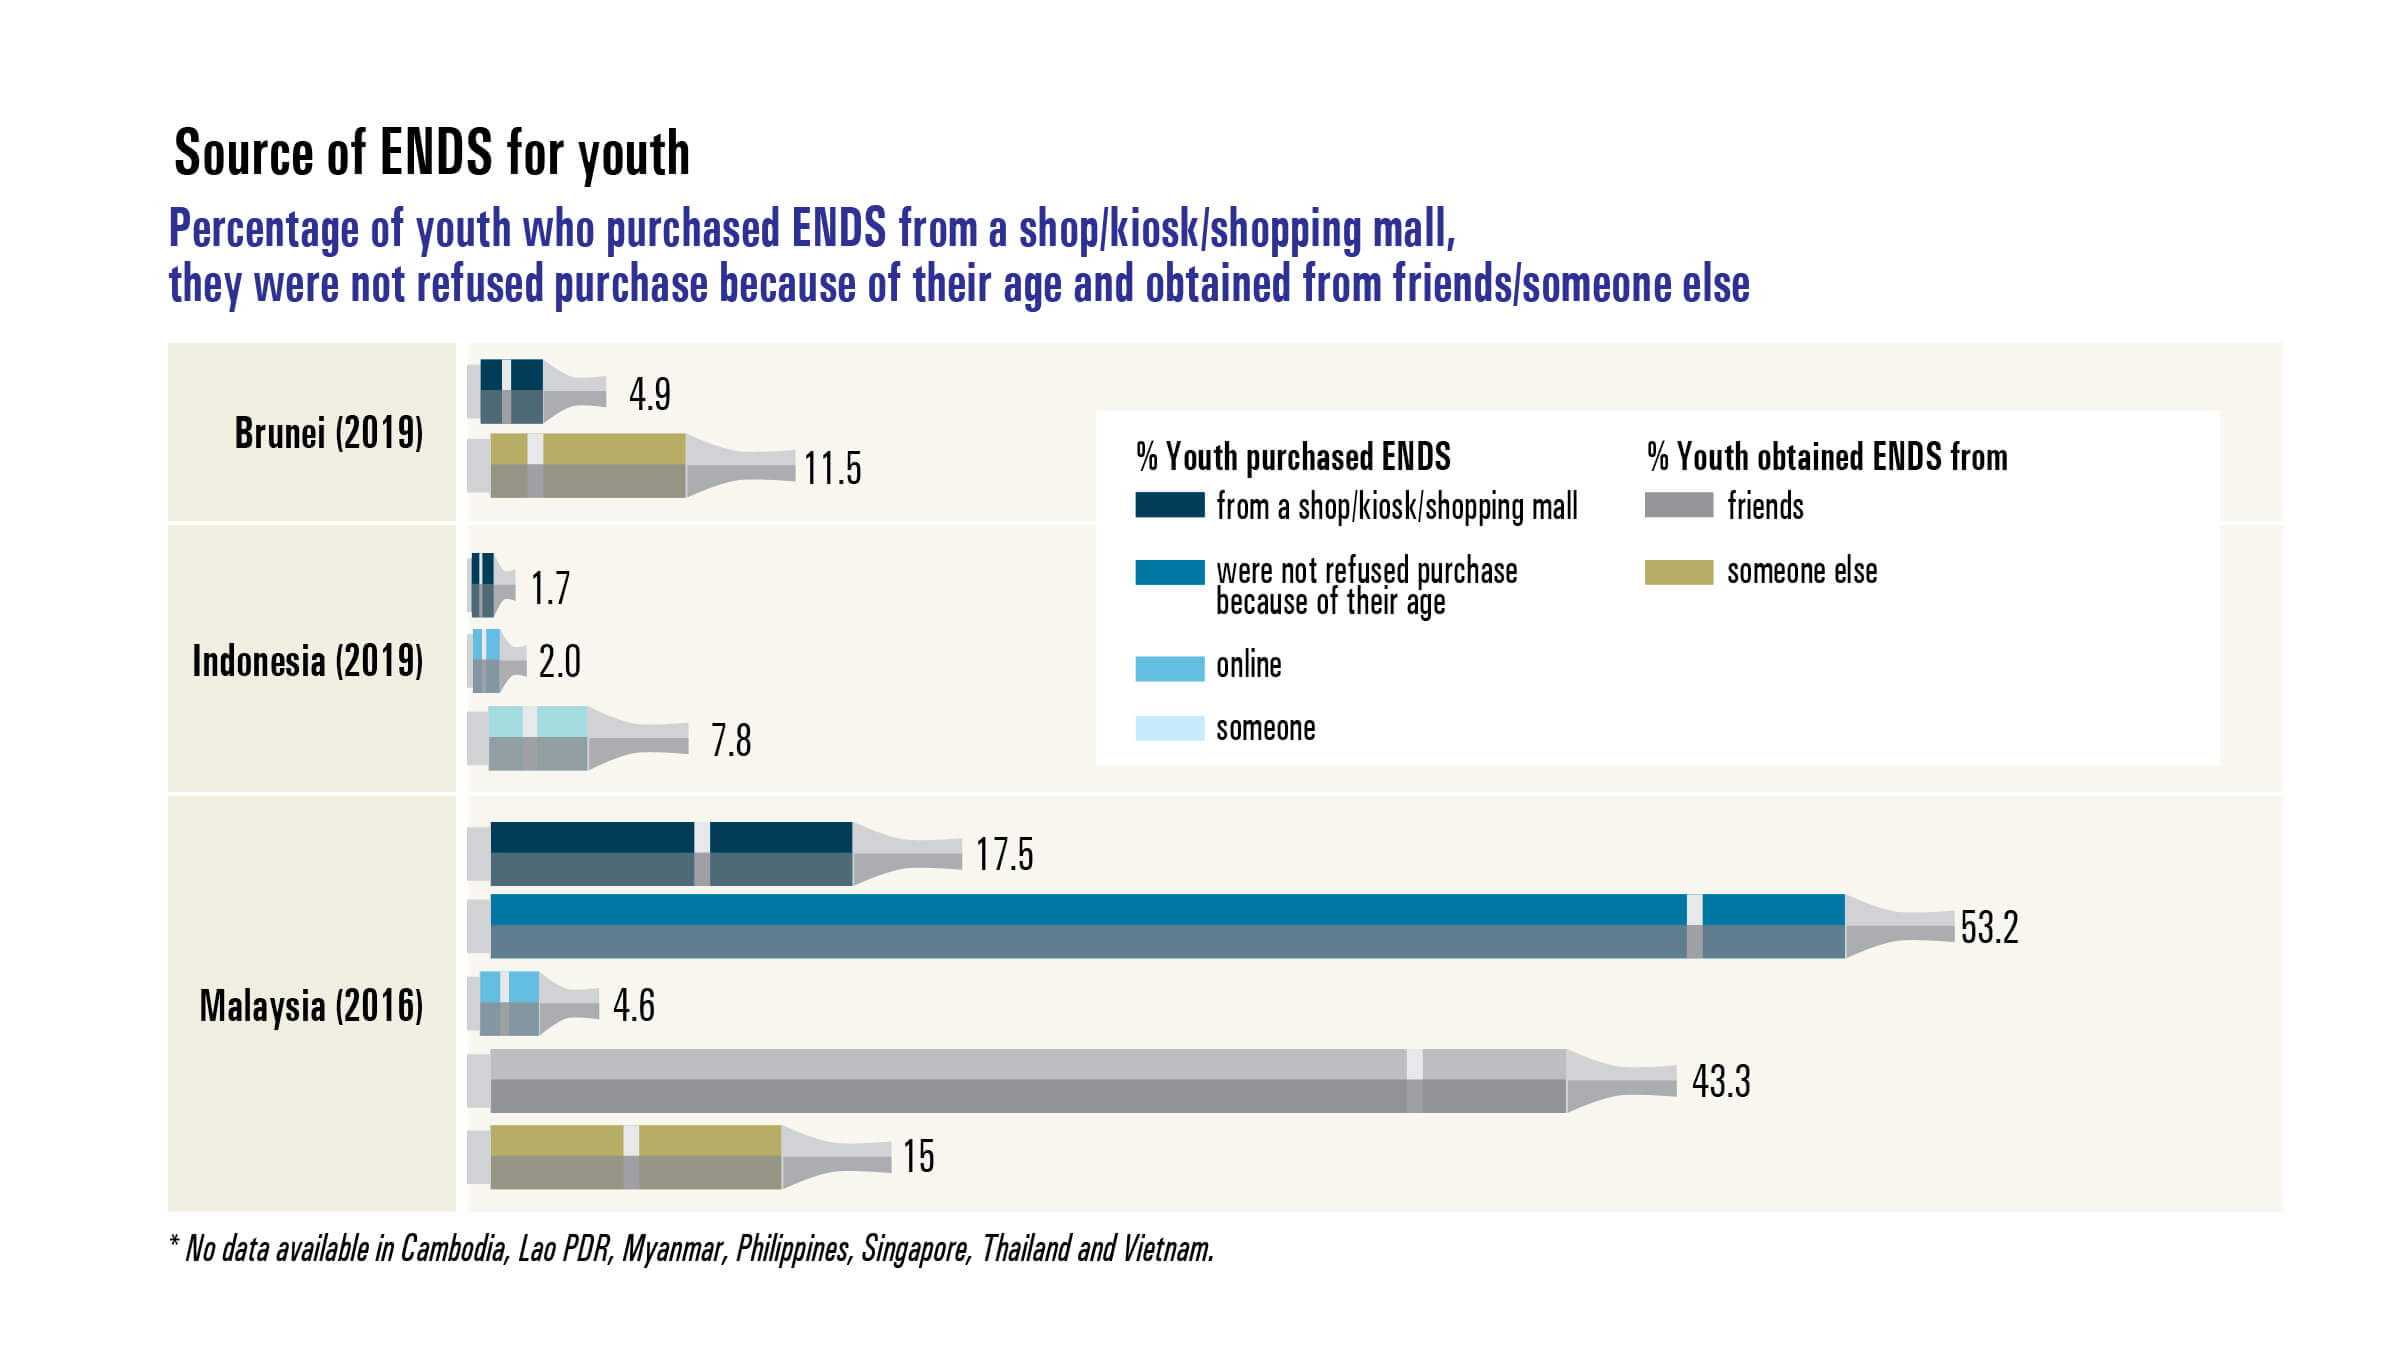 Percentage of youth who purchased ENDS from a shop/kiosk/shopping mall, they were not refused purchase because of their age and obtained from friends/someone else